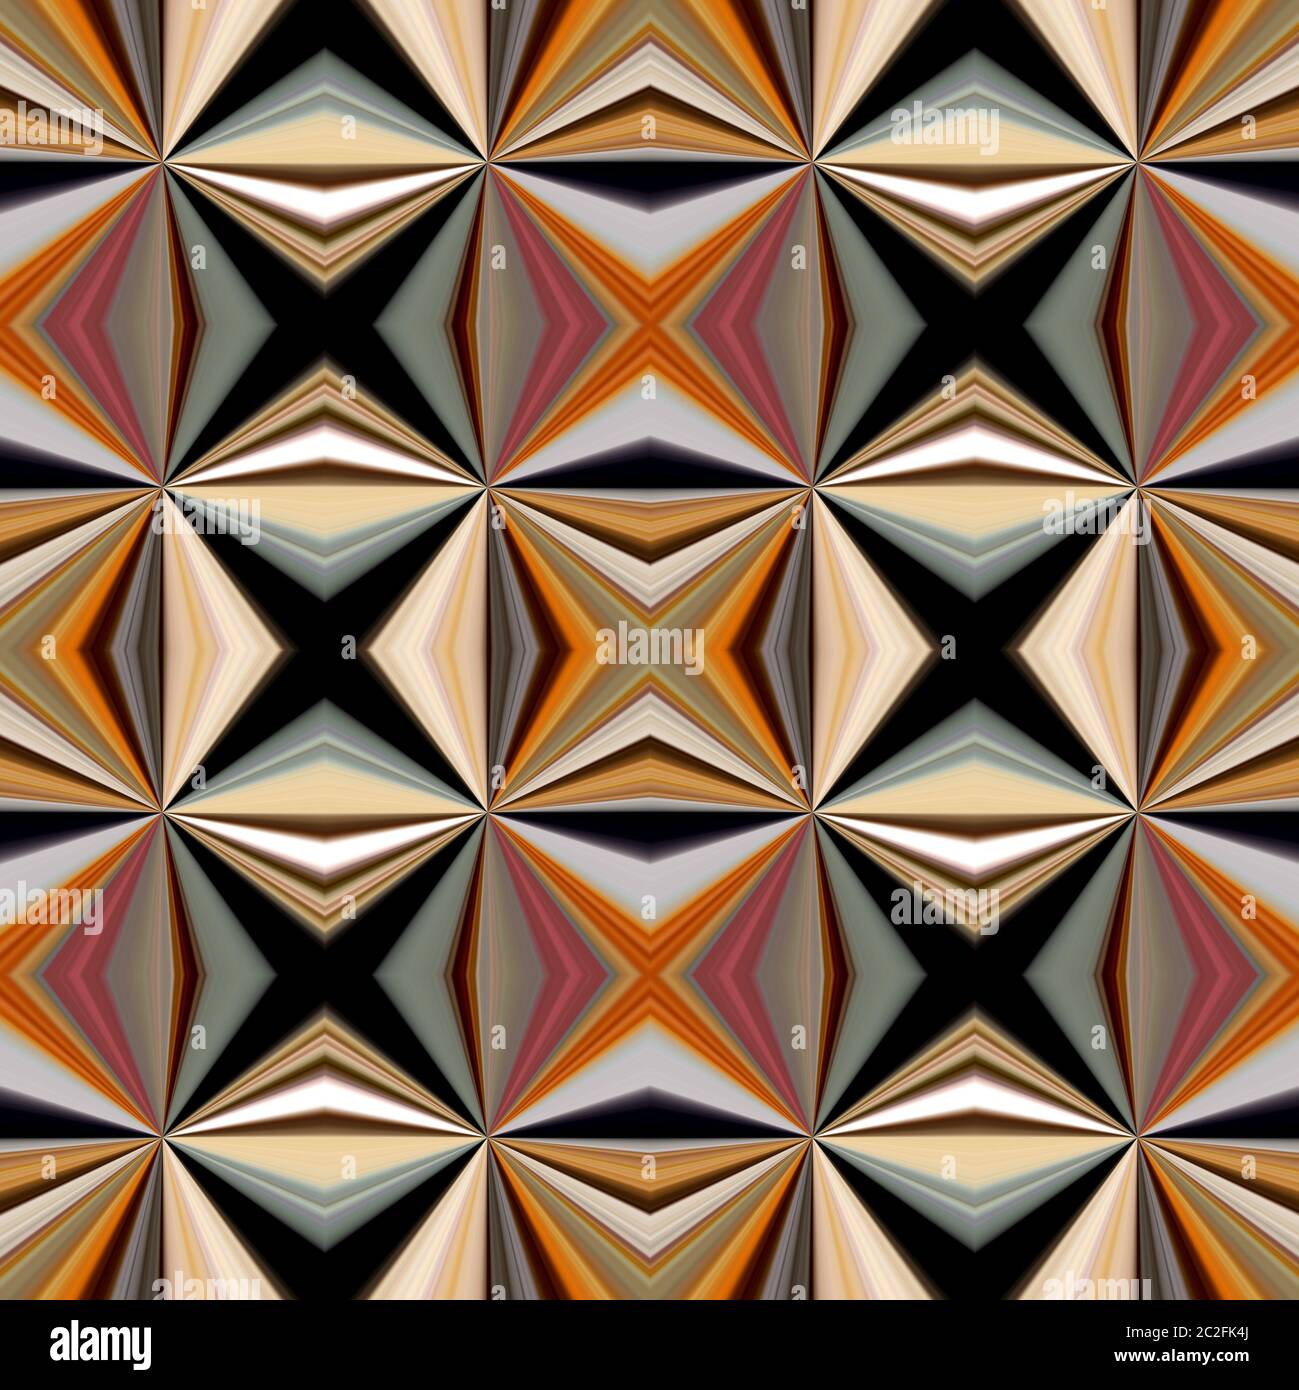 digital created seamless repeating tiles pattern in brown and beige neutrals Stock Photo